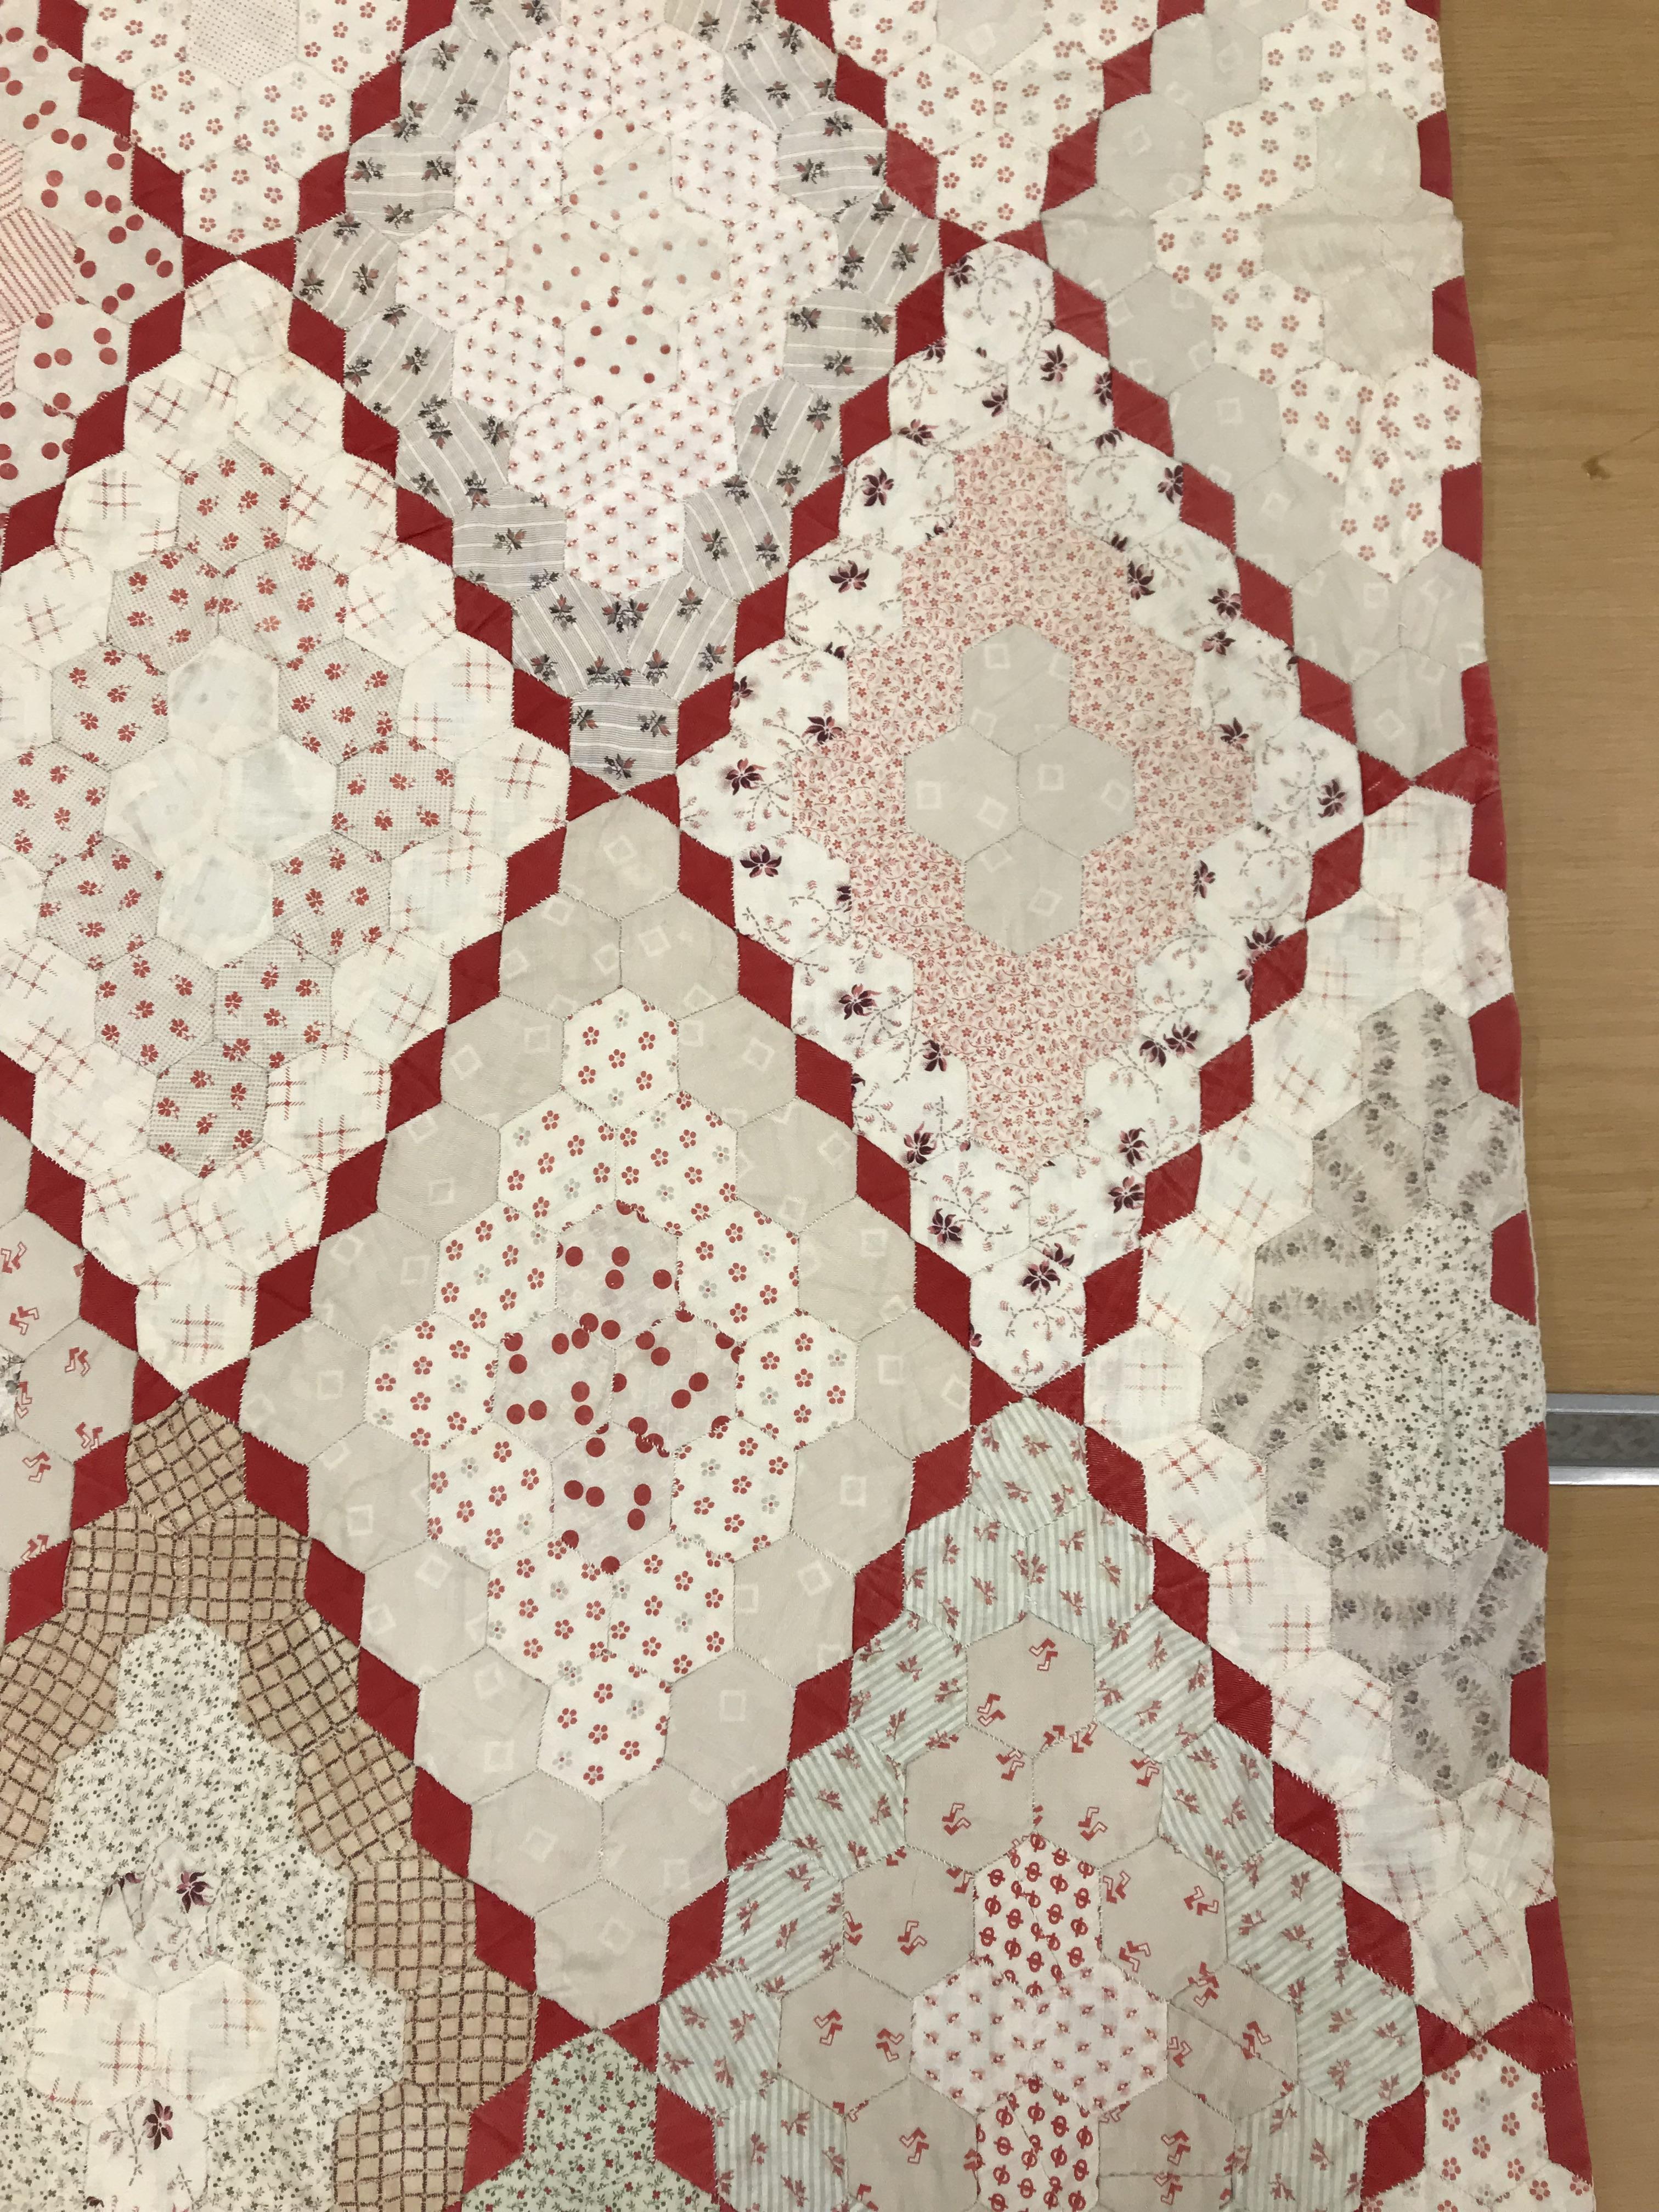 An early 20th Century hand-stitched, pieced quilt, backed with plain fabric and no wadding, - Image 6 of 36